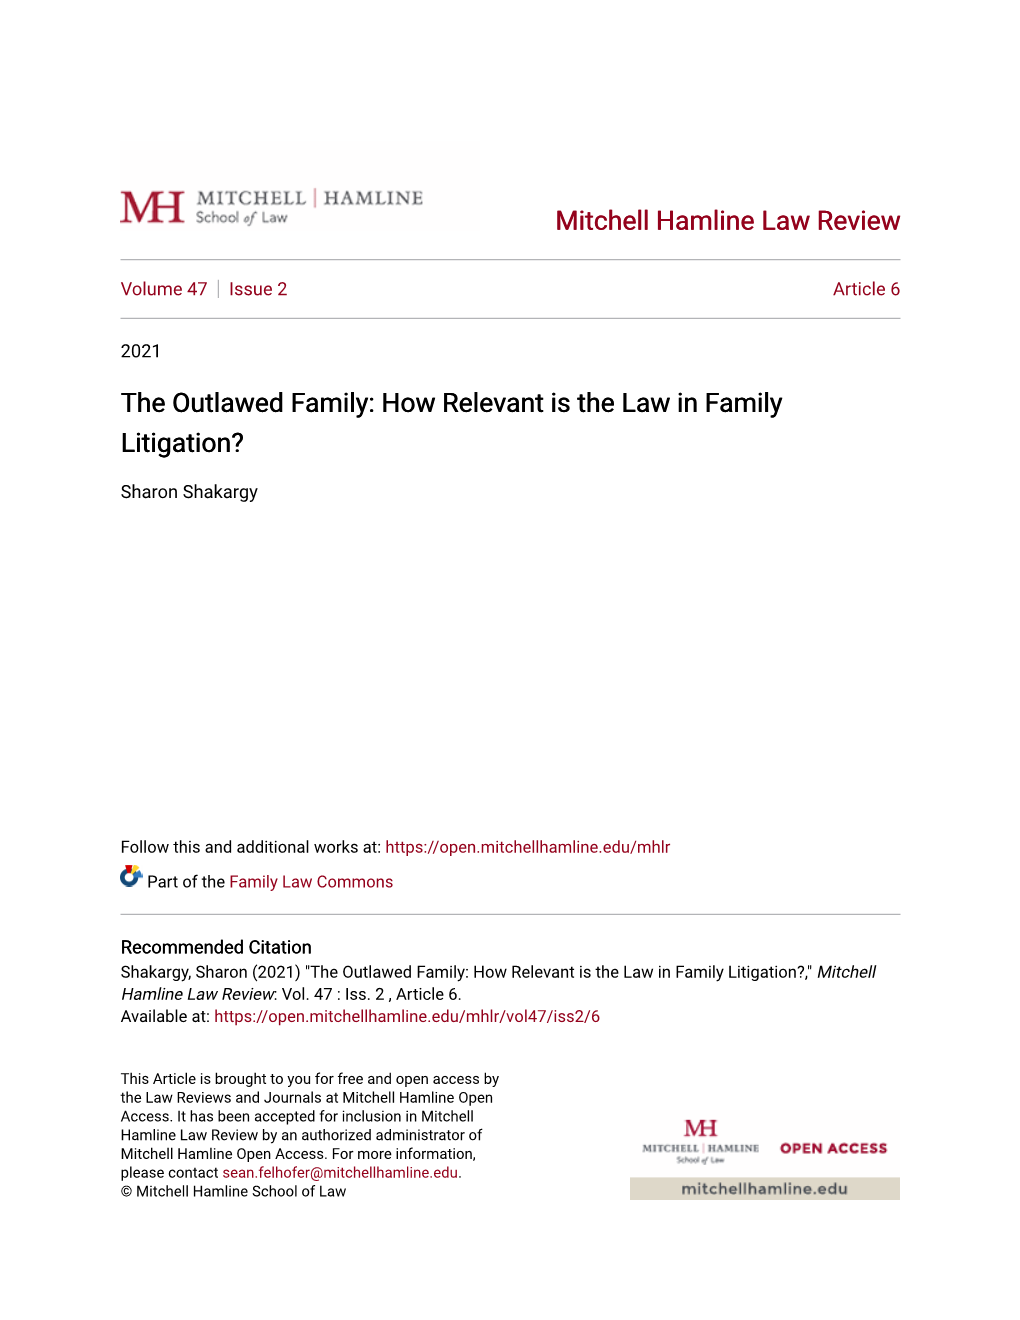 How Relevant Is the Law in Family Litigation?